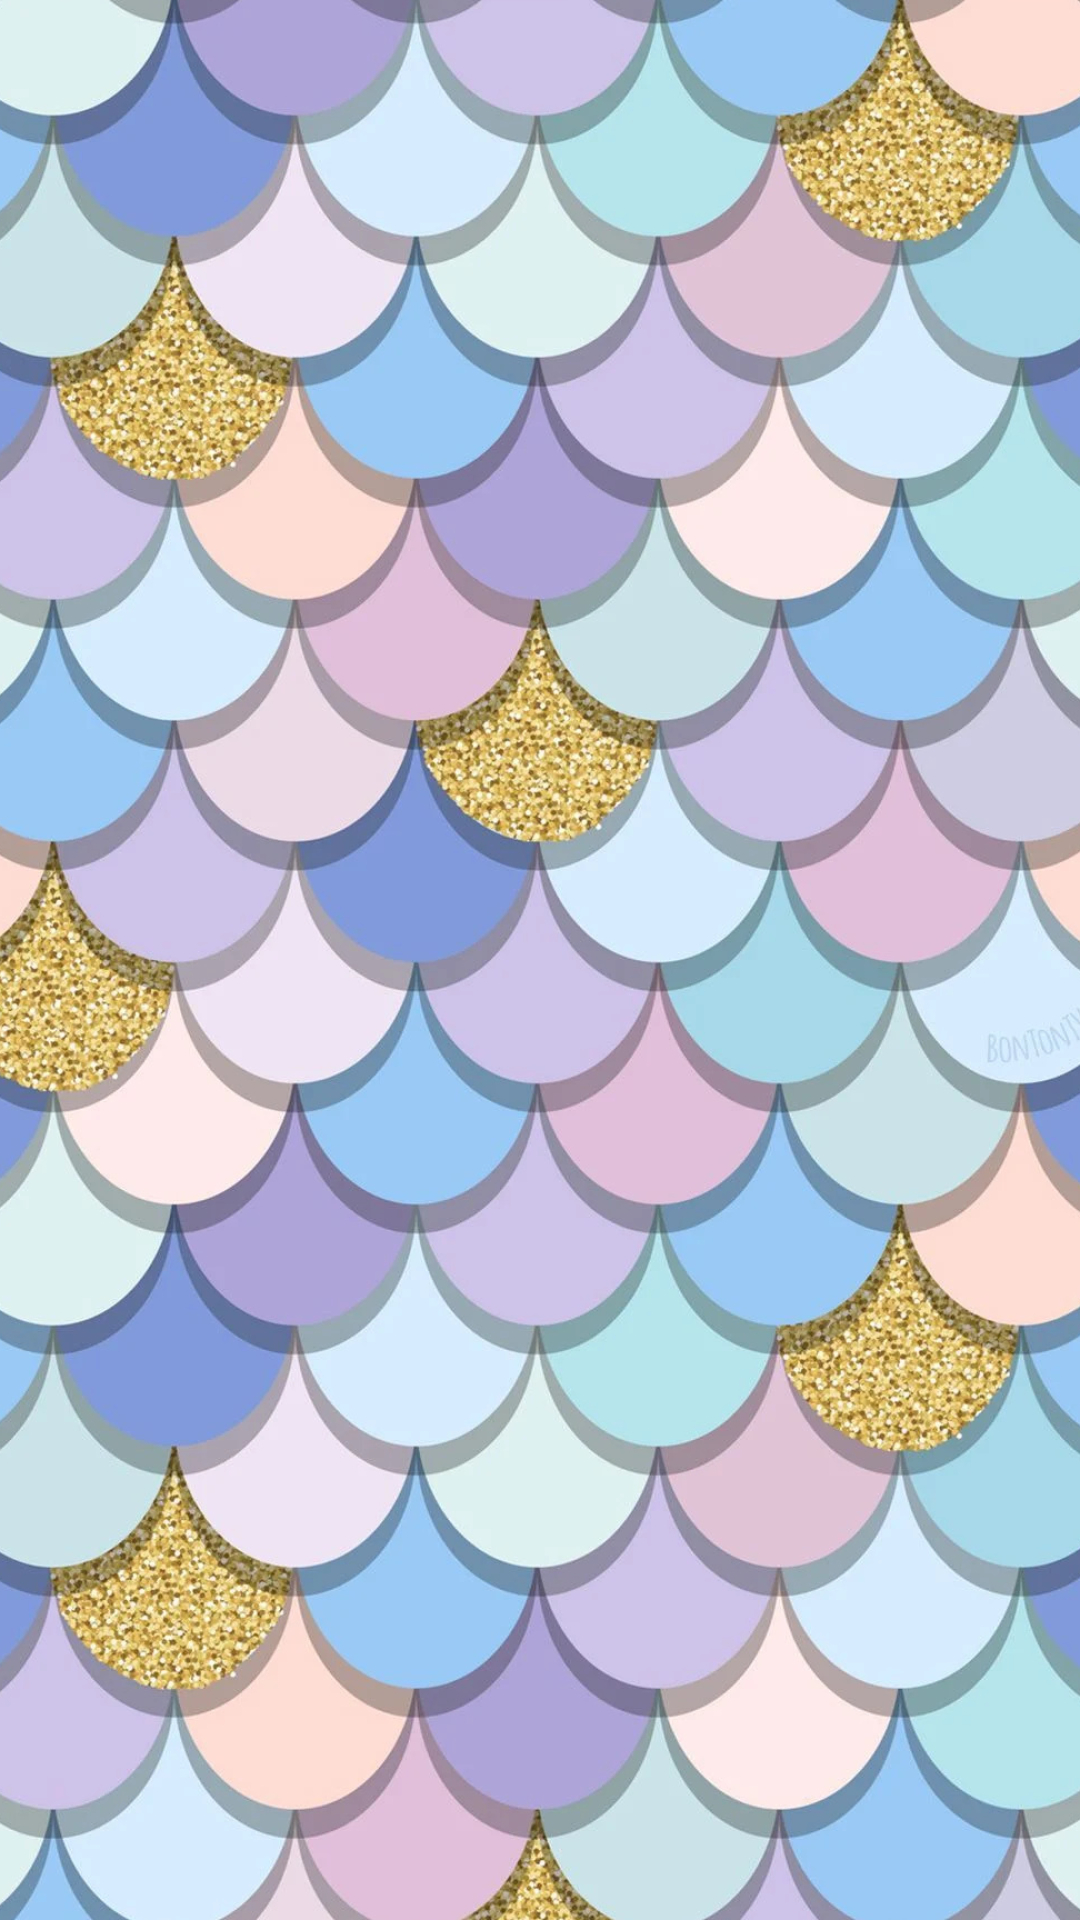 Mermaid scales iPhone, Beautiful wallpapers, Phone backgrounds, Whimsical design, 1080x1920 Full HD Handy